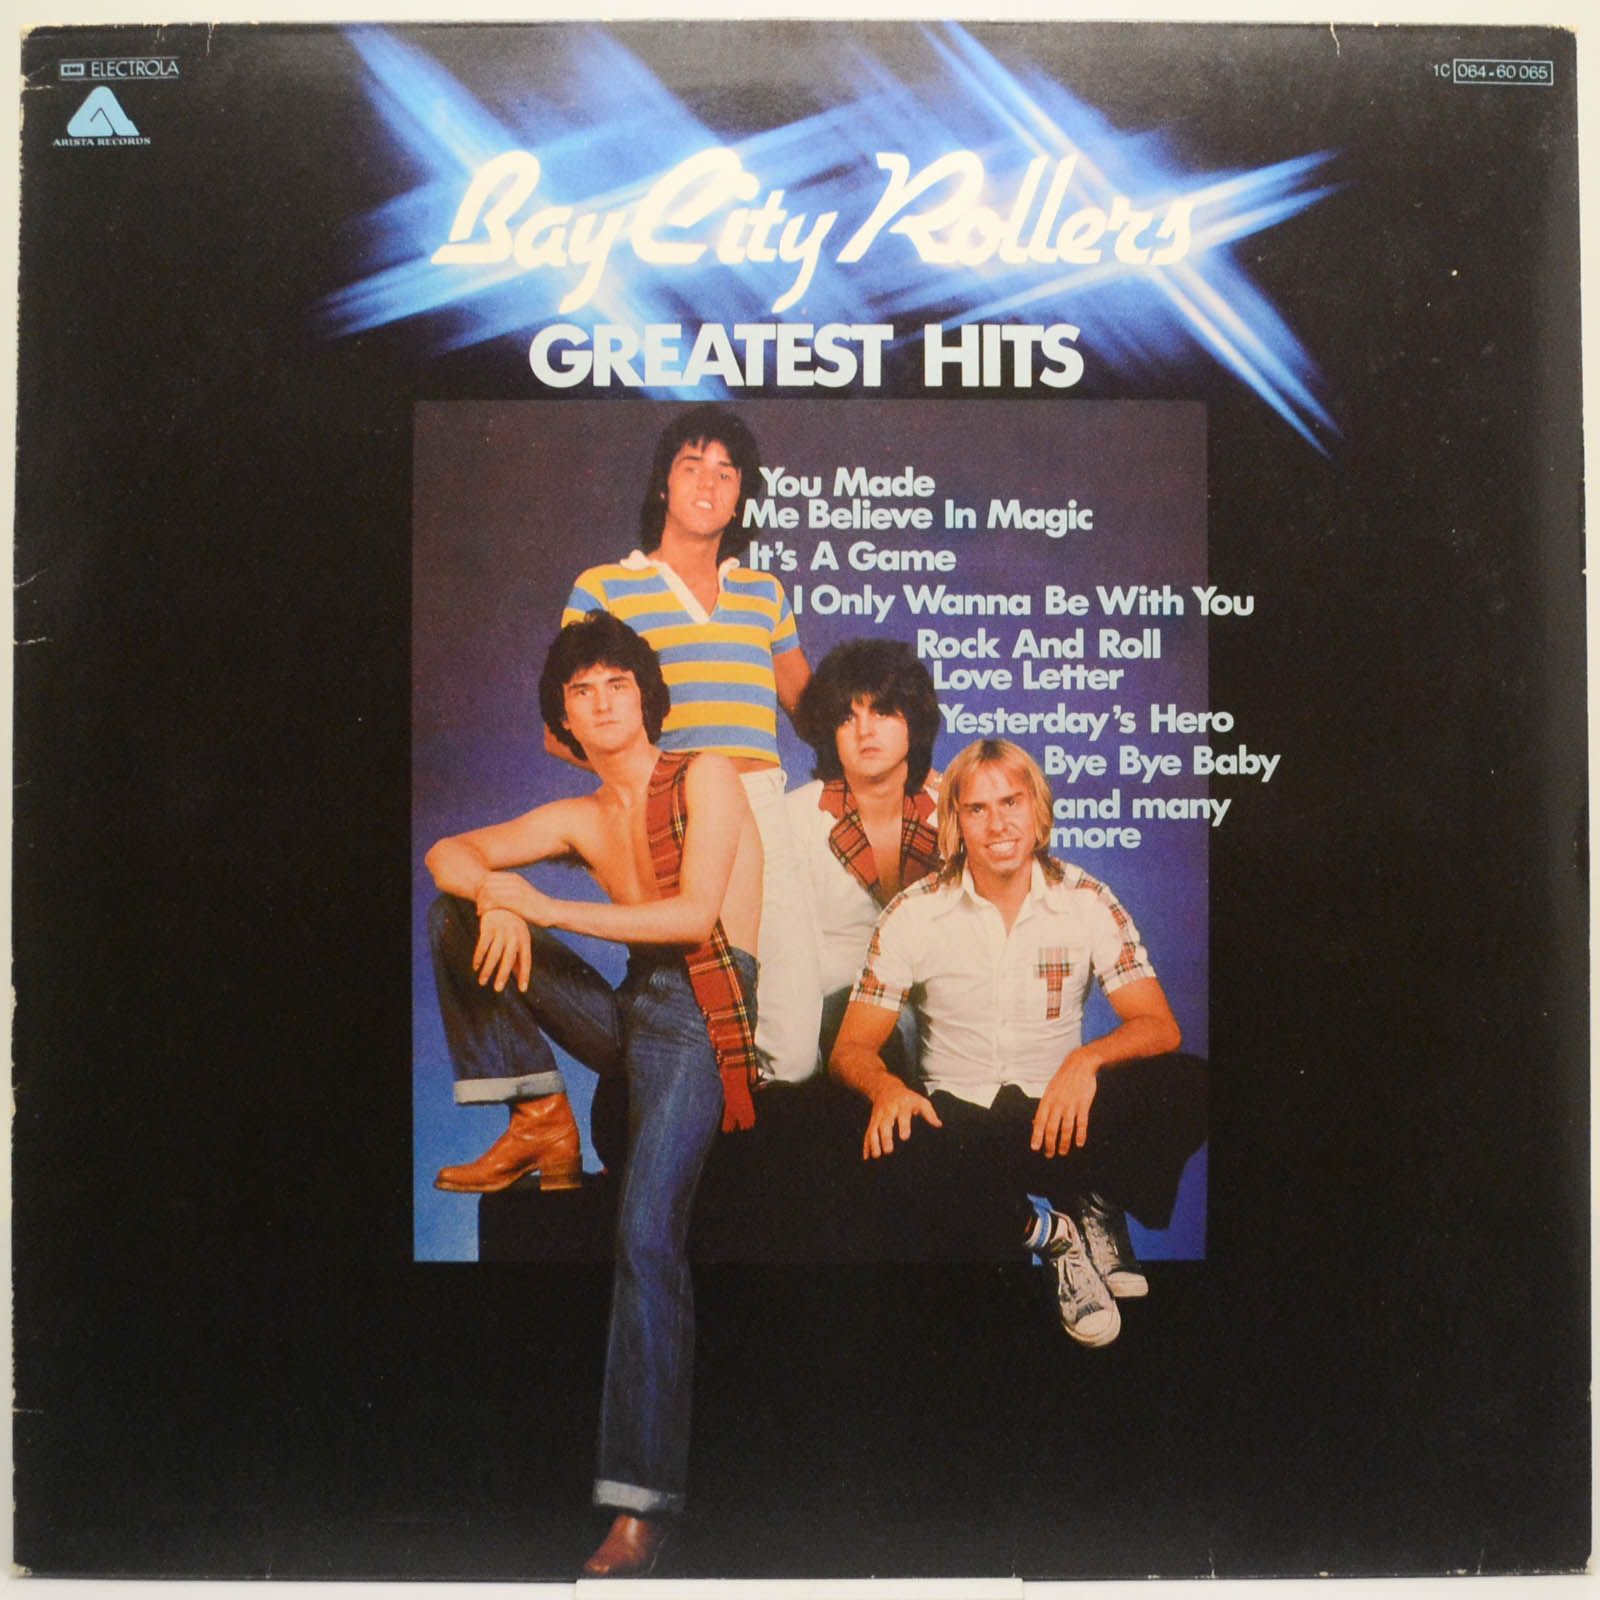 Bay City Rollers — Greatest Hits, 1977